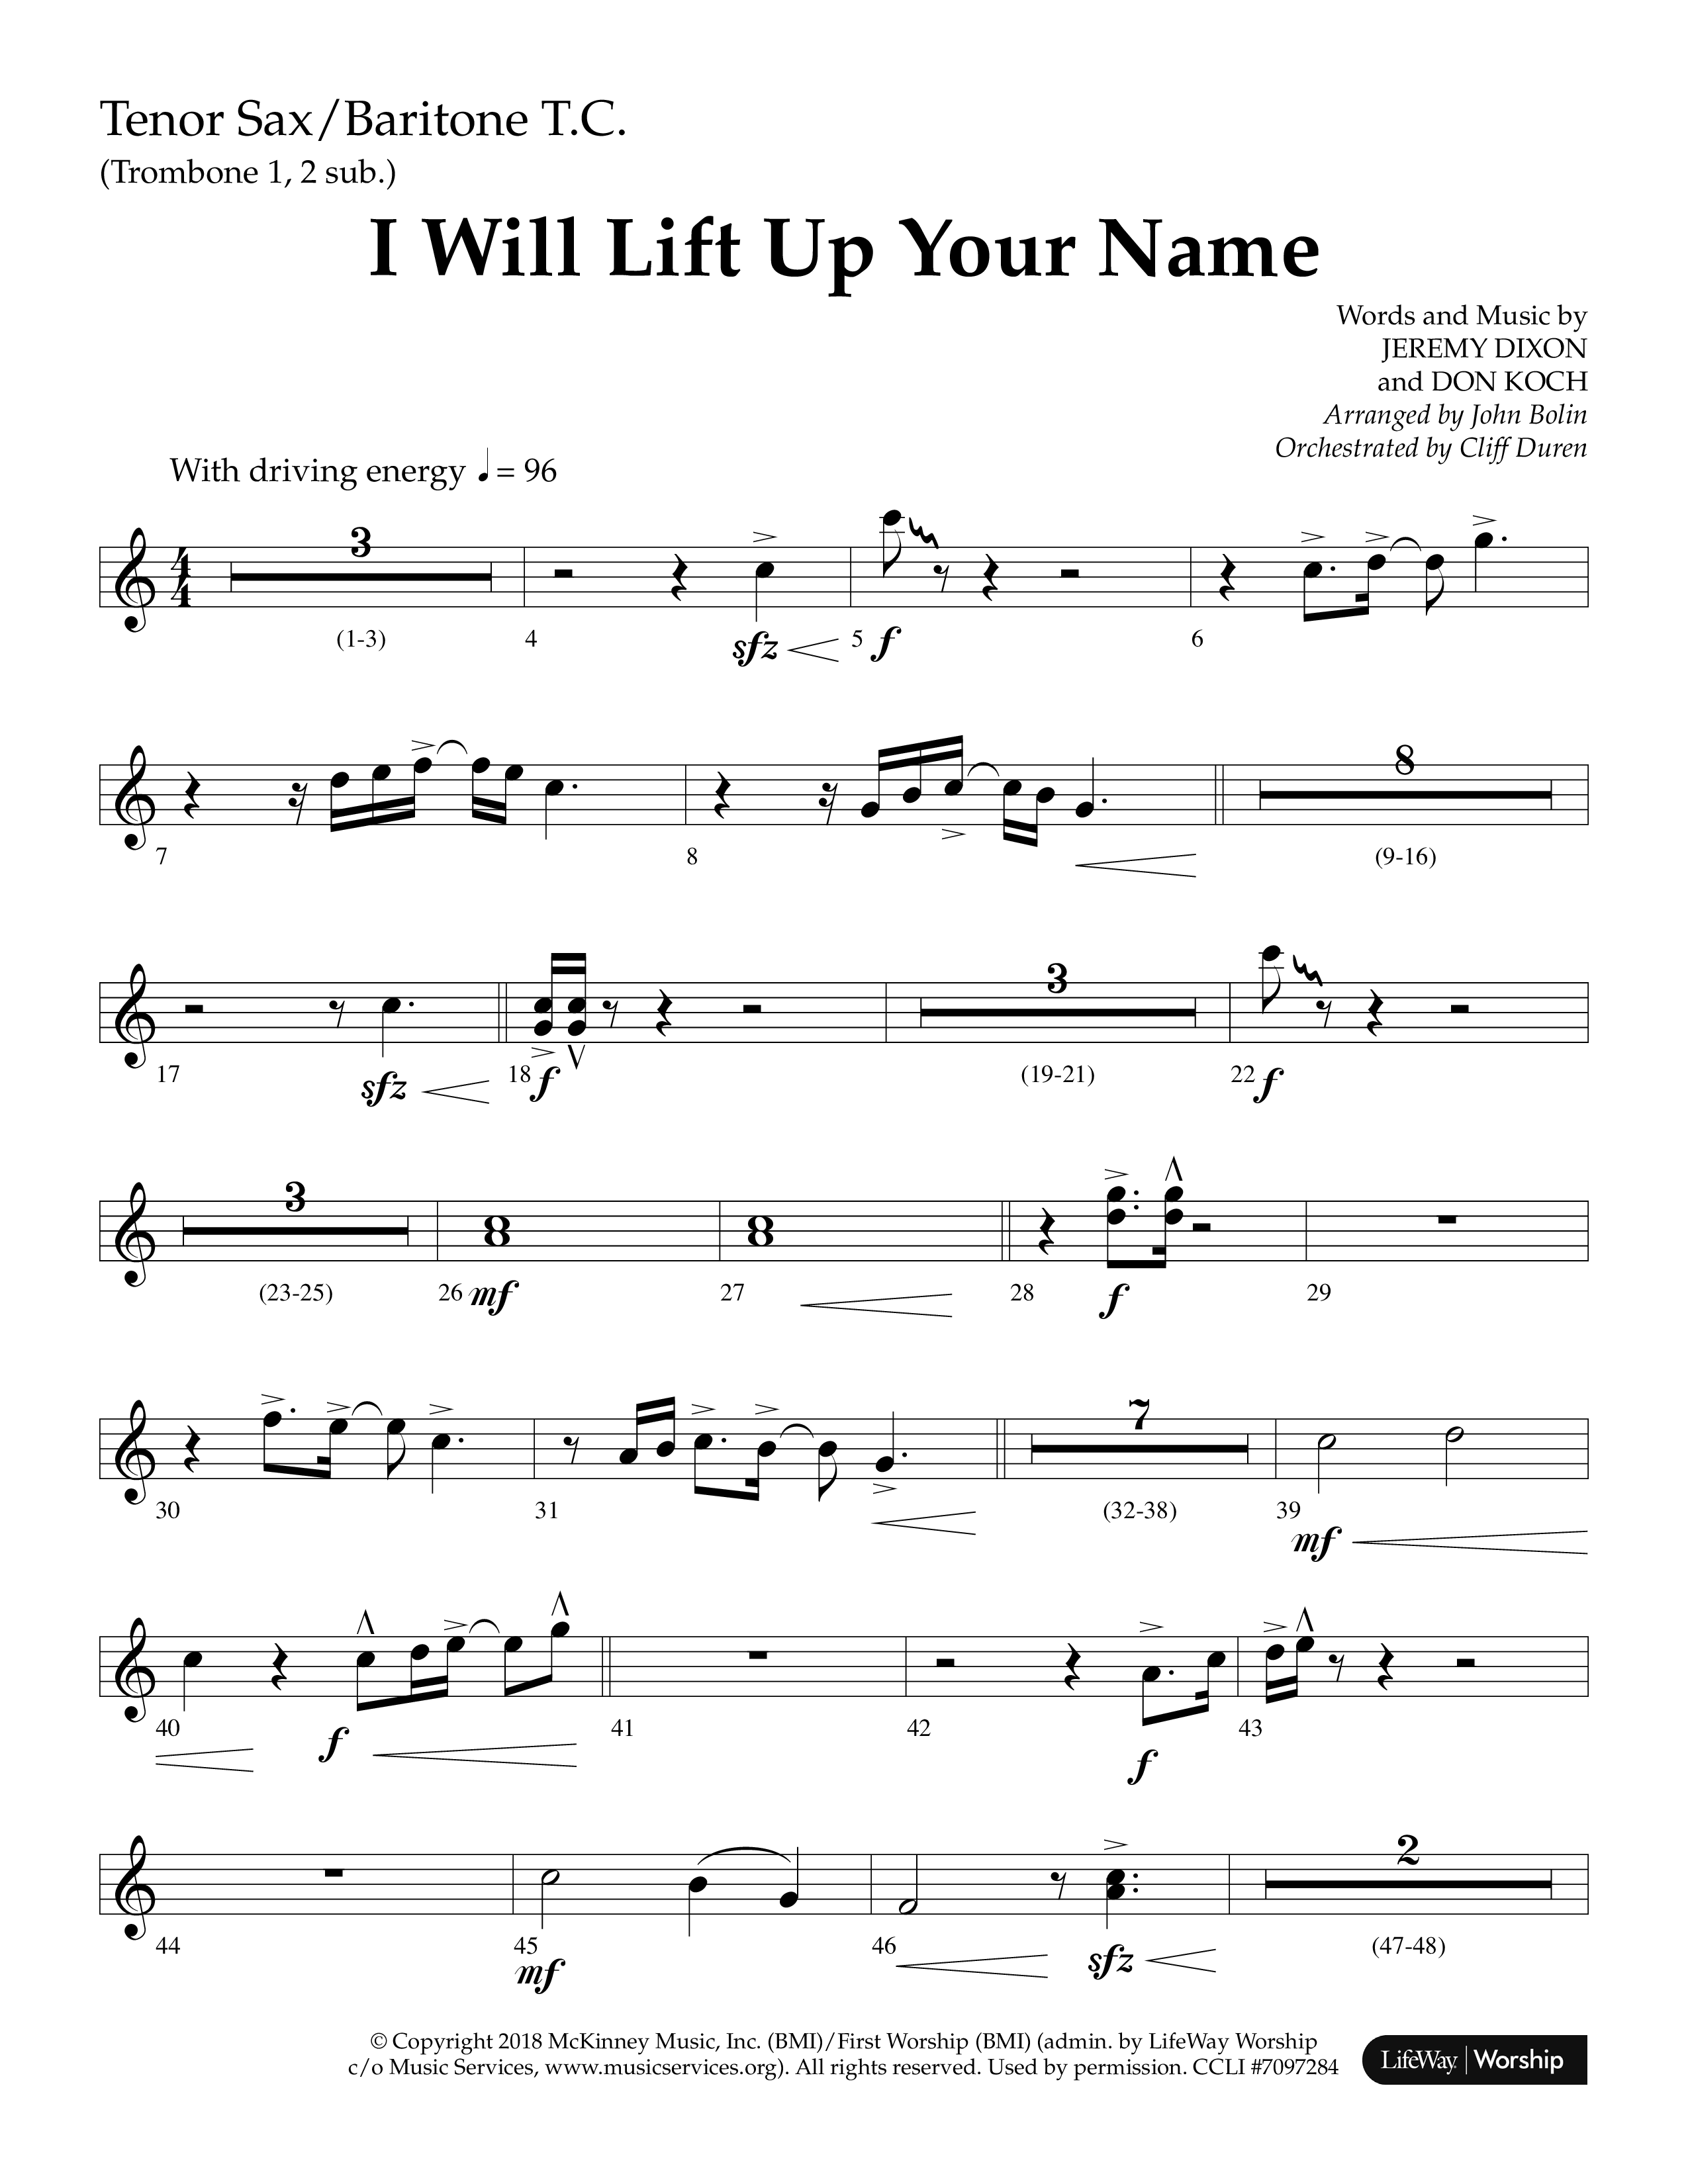 I Will Lift Up Your Name (Choral Anthem SATB) Tenor Sax/Baritone T.C. (Lifeway Choral / Arr. John Bolin / Orch. Cliff Duren)